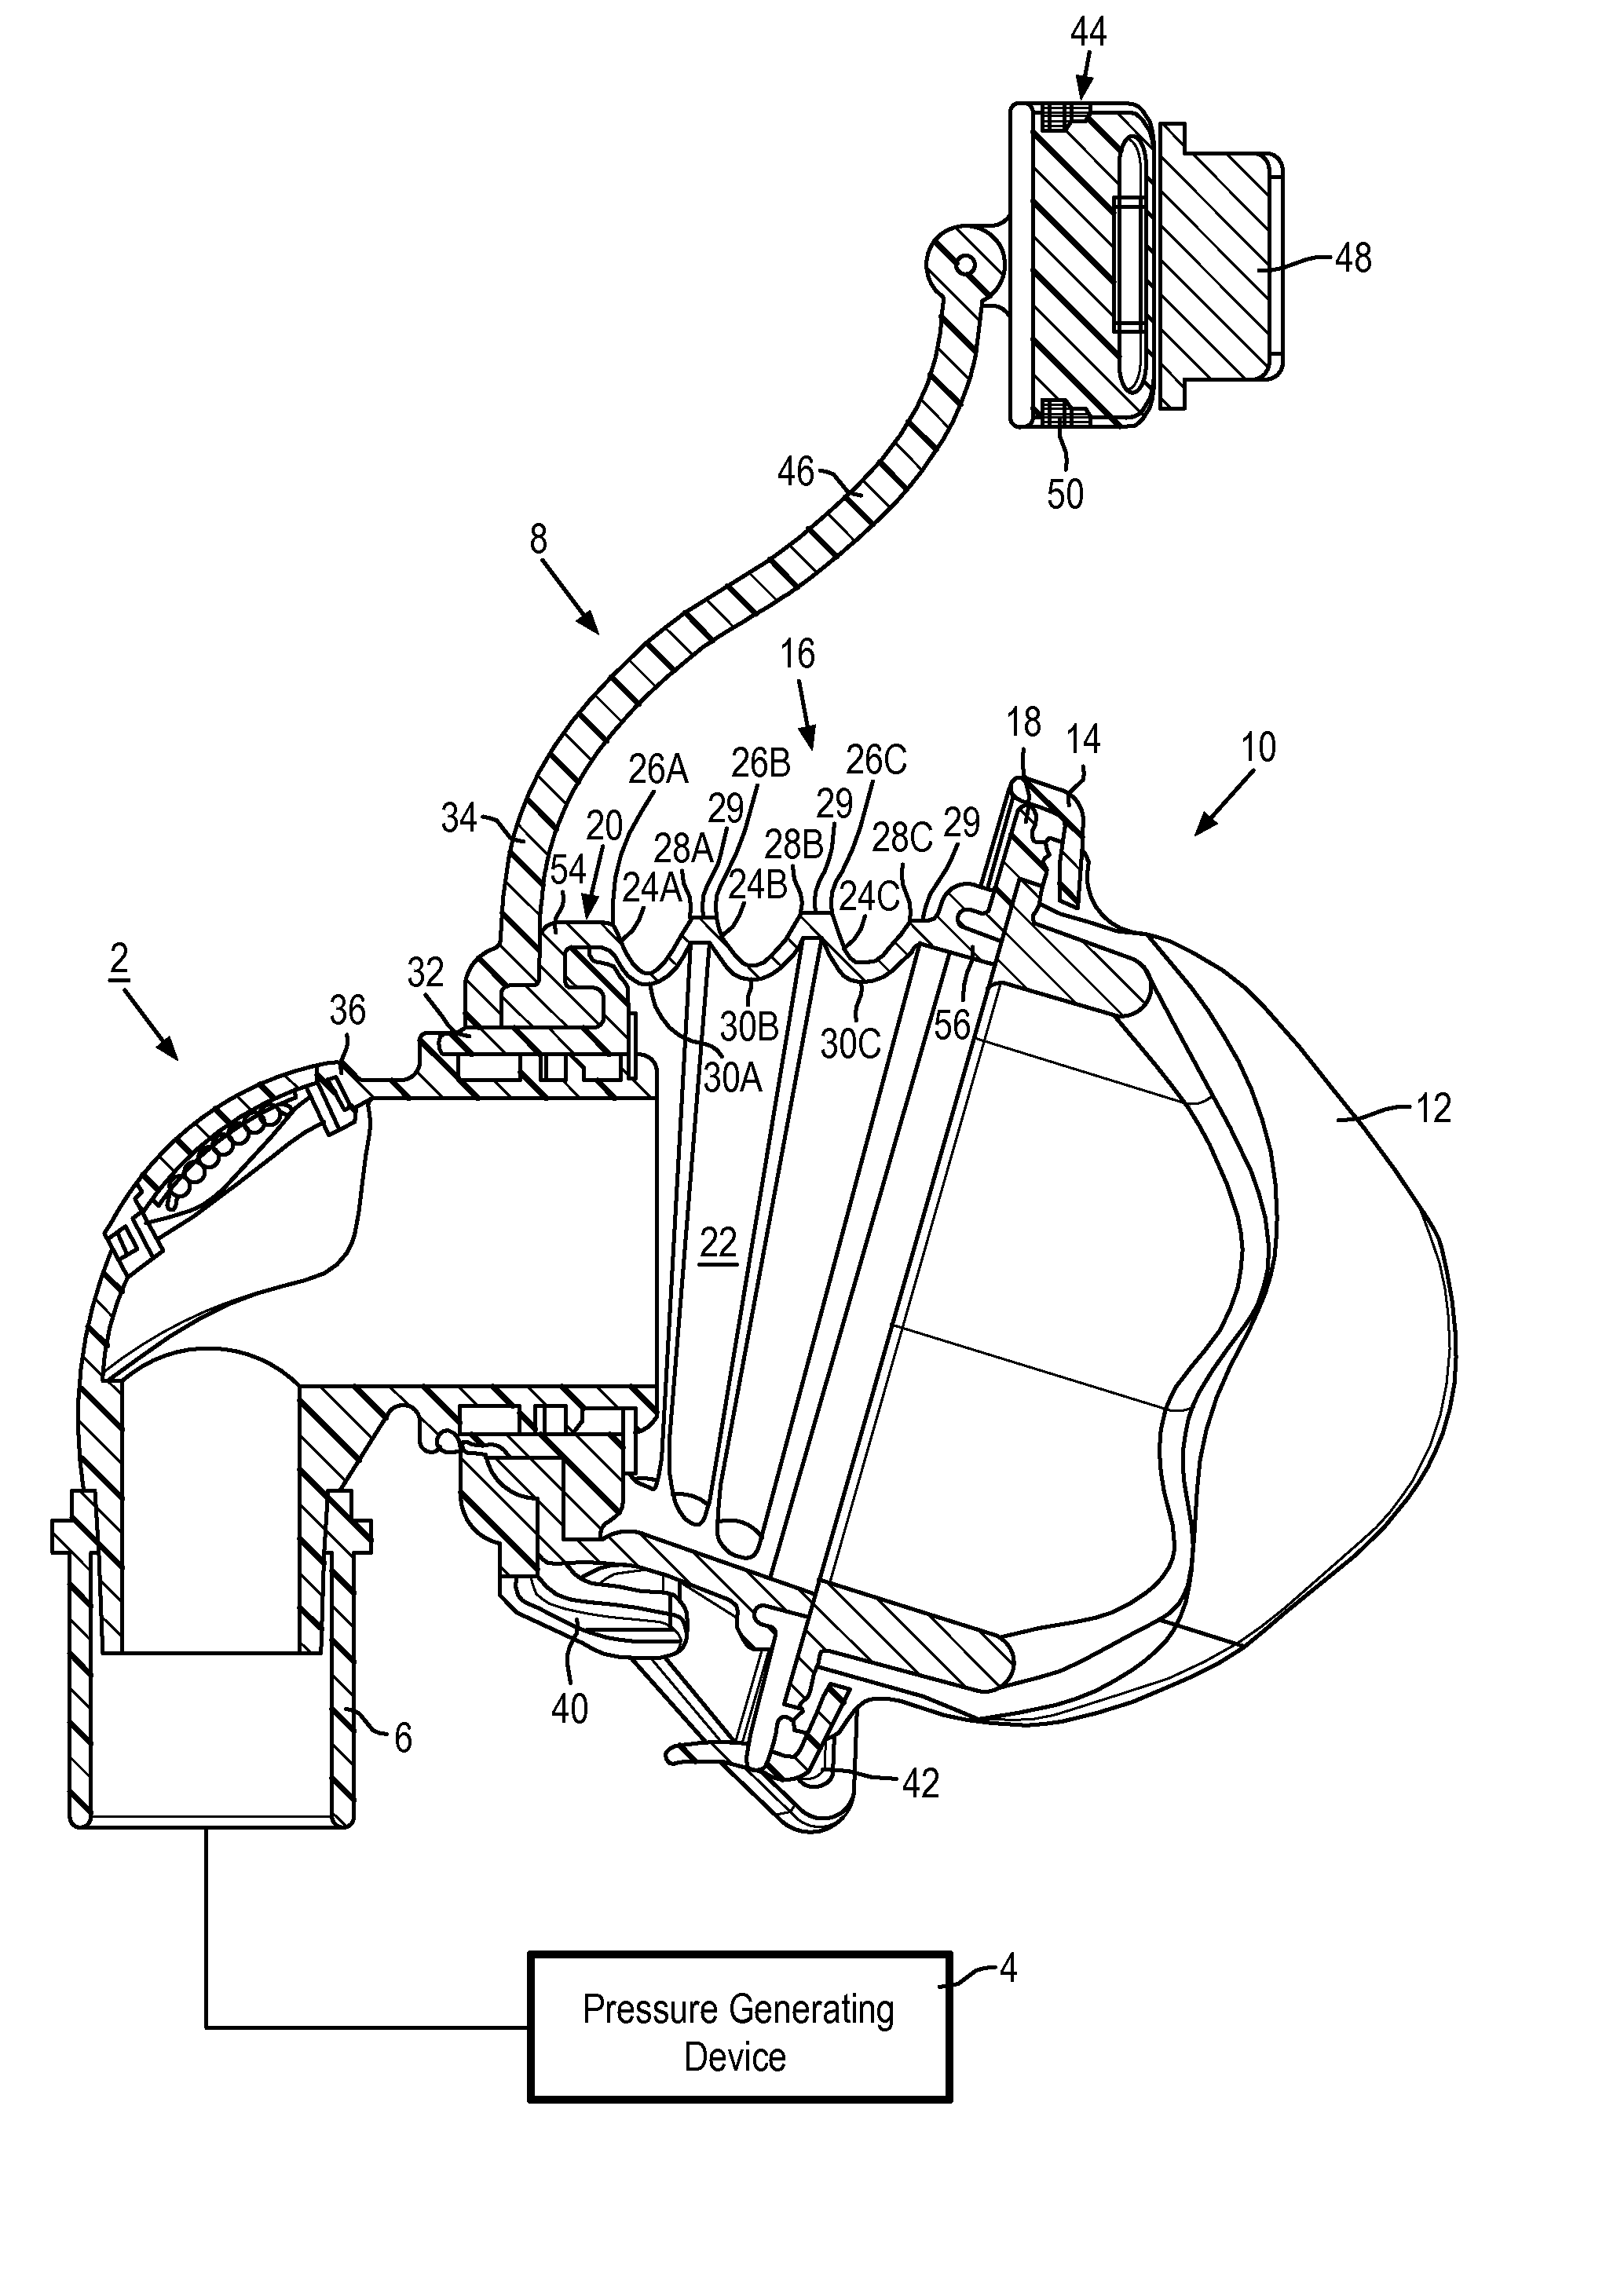 Patient interface device including a dynamic self adjustment mechanism